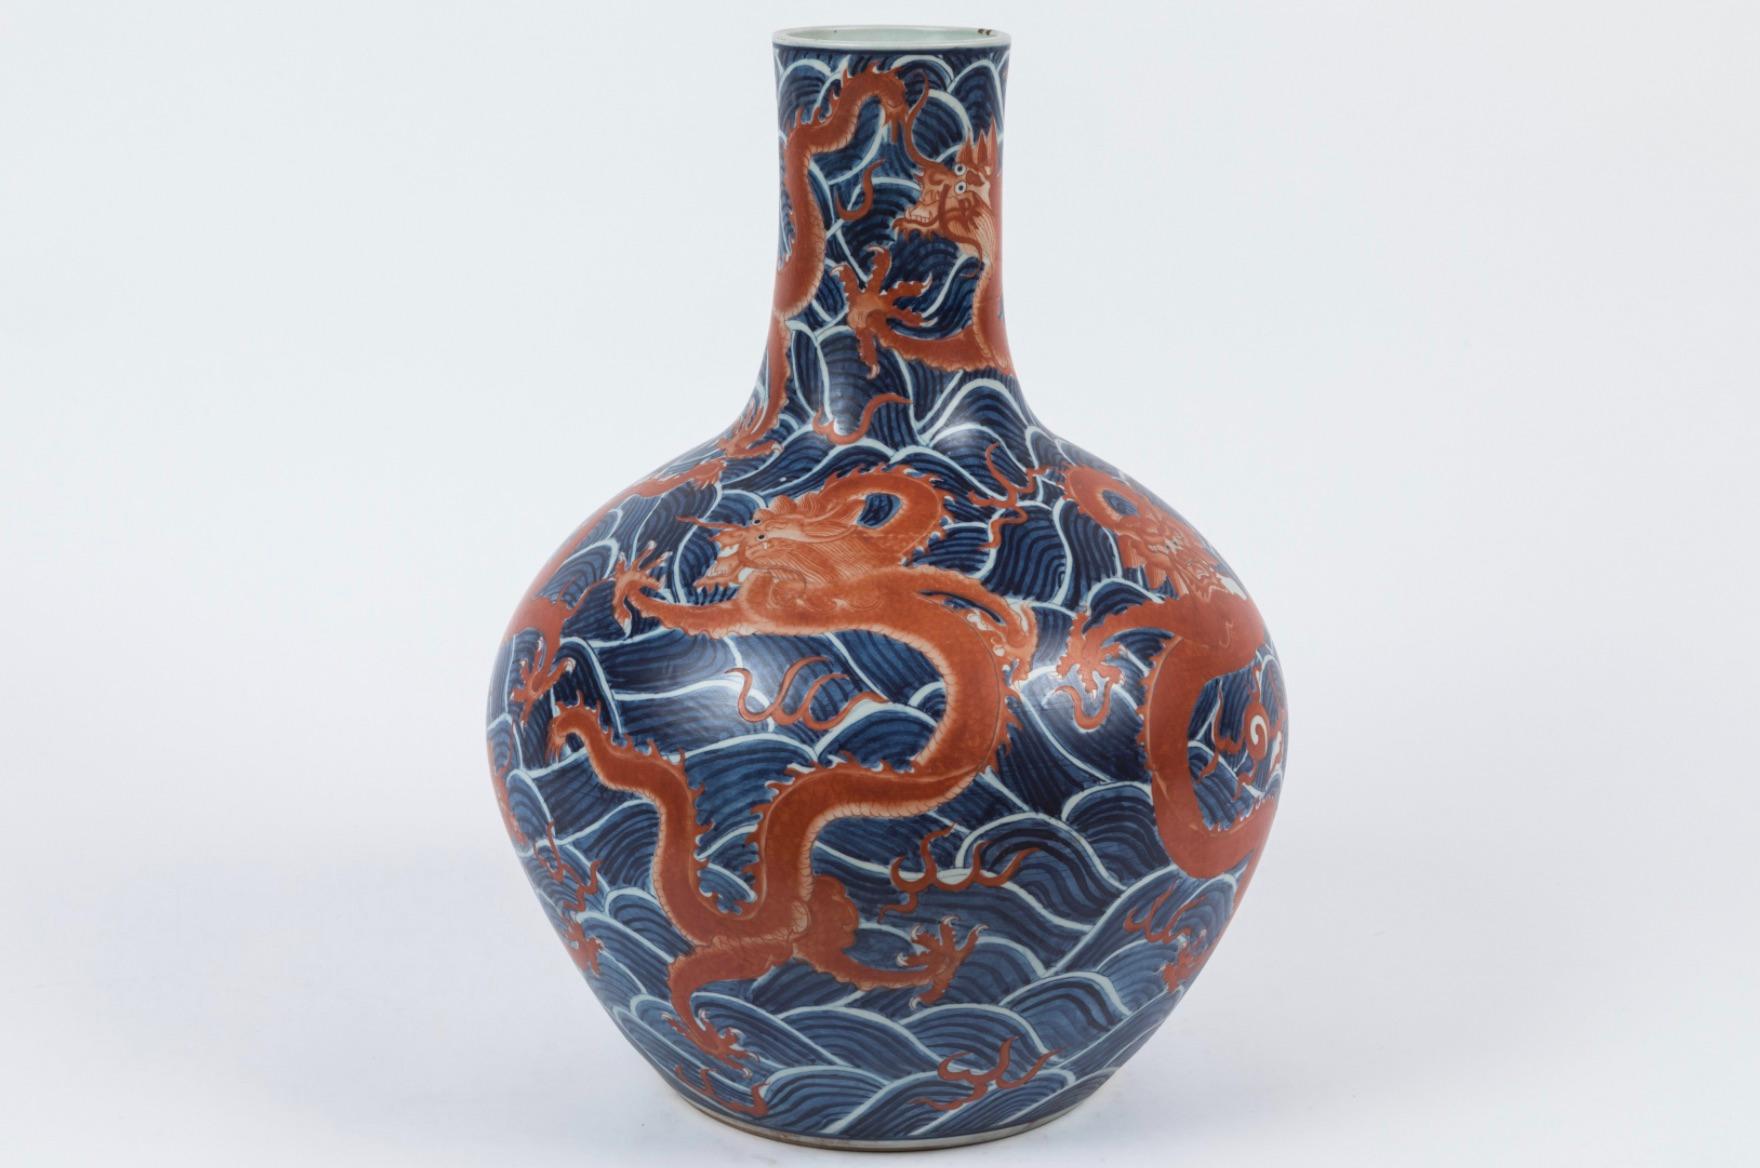 Antique blue and red, Chinese export porcelain vase, with wooden stand,
1920s.